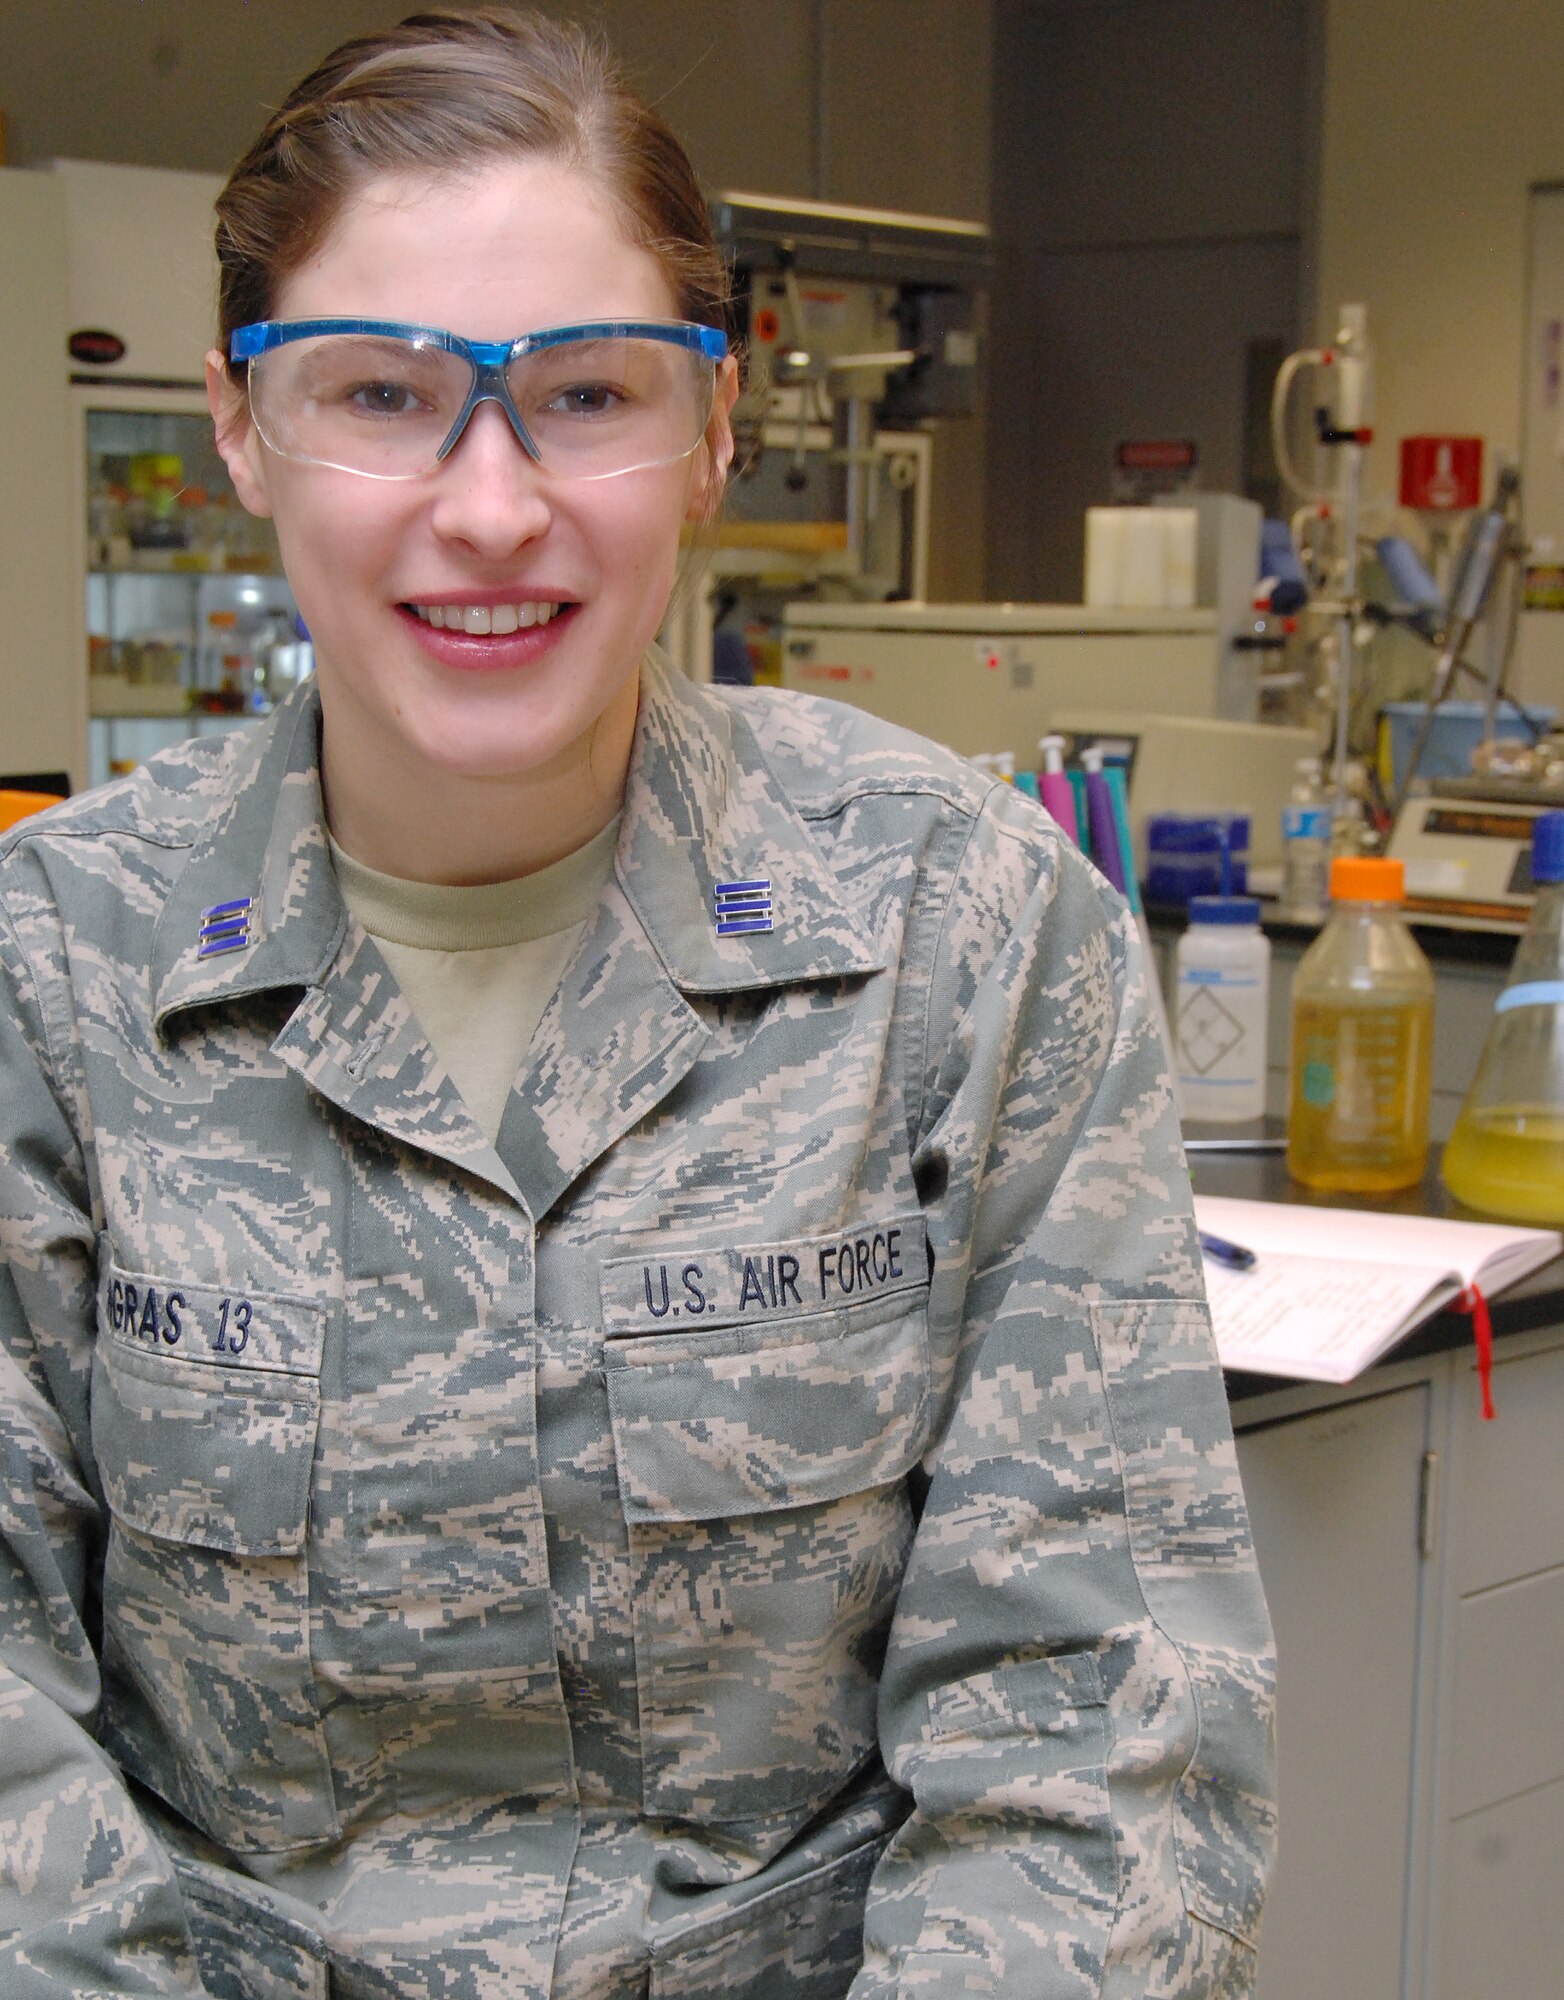 Cadet 1st Class Alexa Gingras has drawn interest from Air Force Chief Scientist Dr. Mark Maybury and from the Drug Enforcement Agency for her summer research project, which helped improve both drug test sensitivity and sample processing times for synthetic cannabinoids such as spice. Gingras is a biochemistry major and a native of Tucson, Ariz. (U.S. Air Force photo/Don Branum)